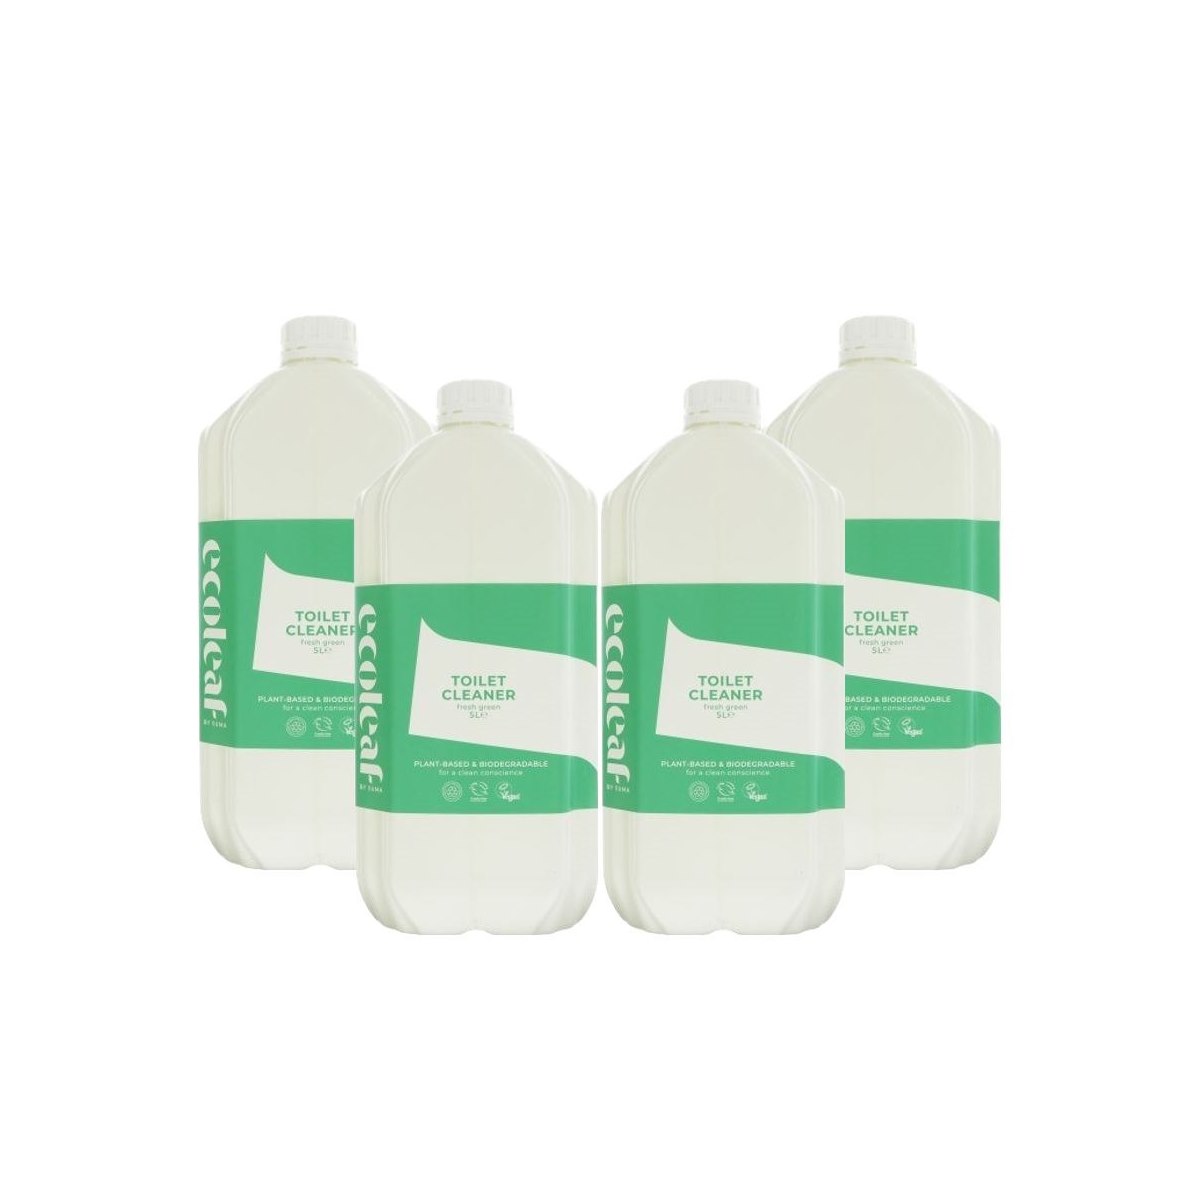 Case of 4 x Ecoleaf By Suma Toilet Cleaner - Fresh Green - 5l